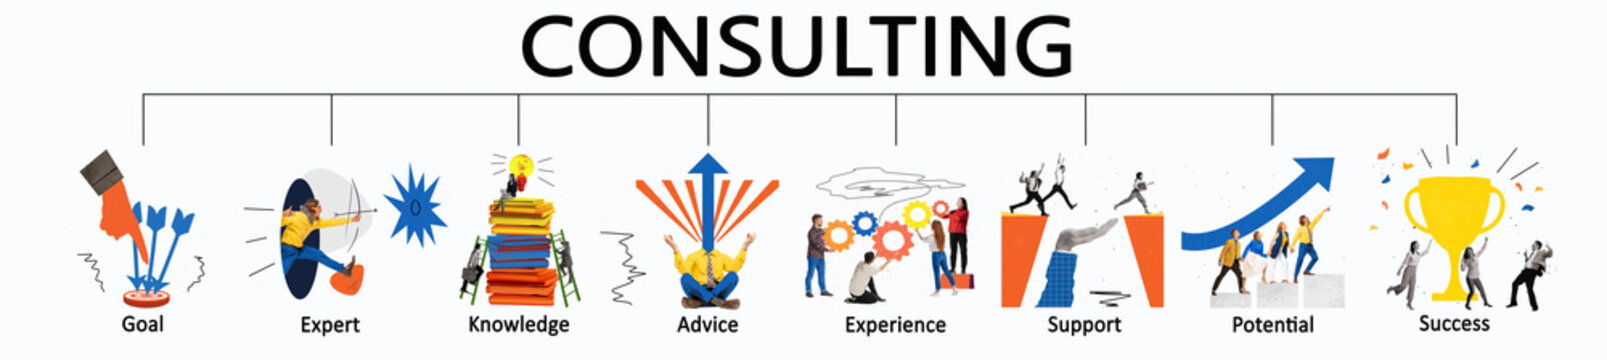 Art collage about Consulting concept. Banner for business, goal, planing, advice, expert, strategy, support and success. Conceptual image about business processes.